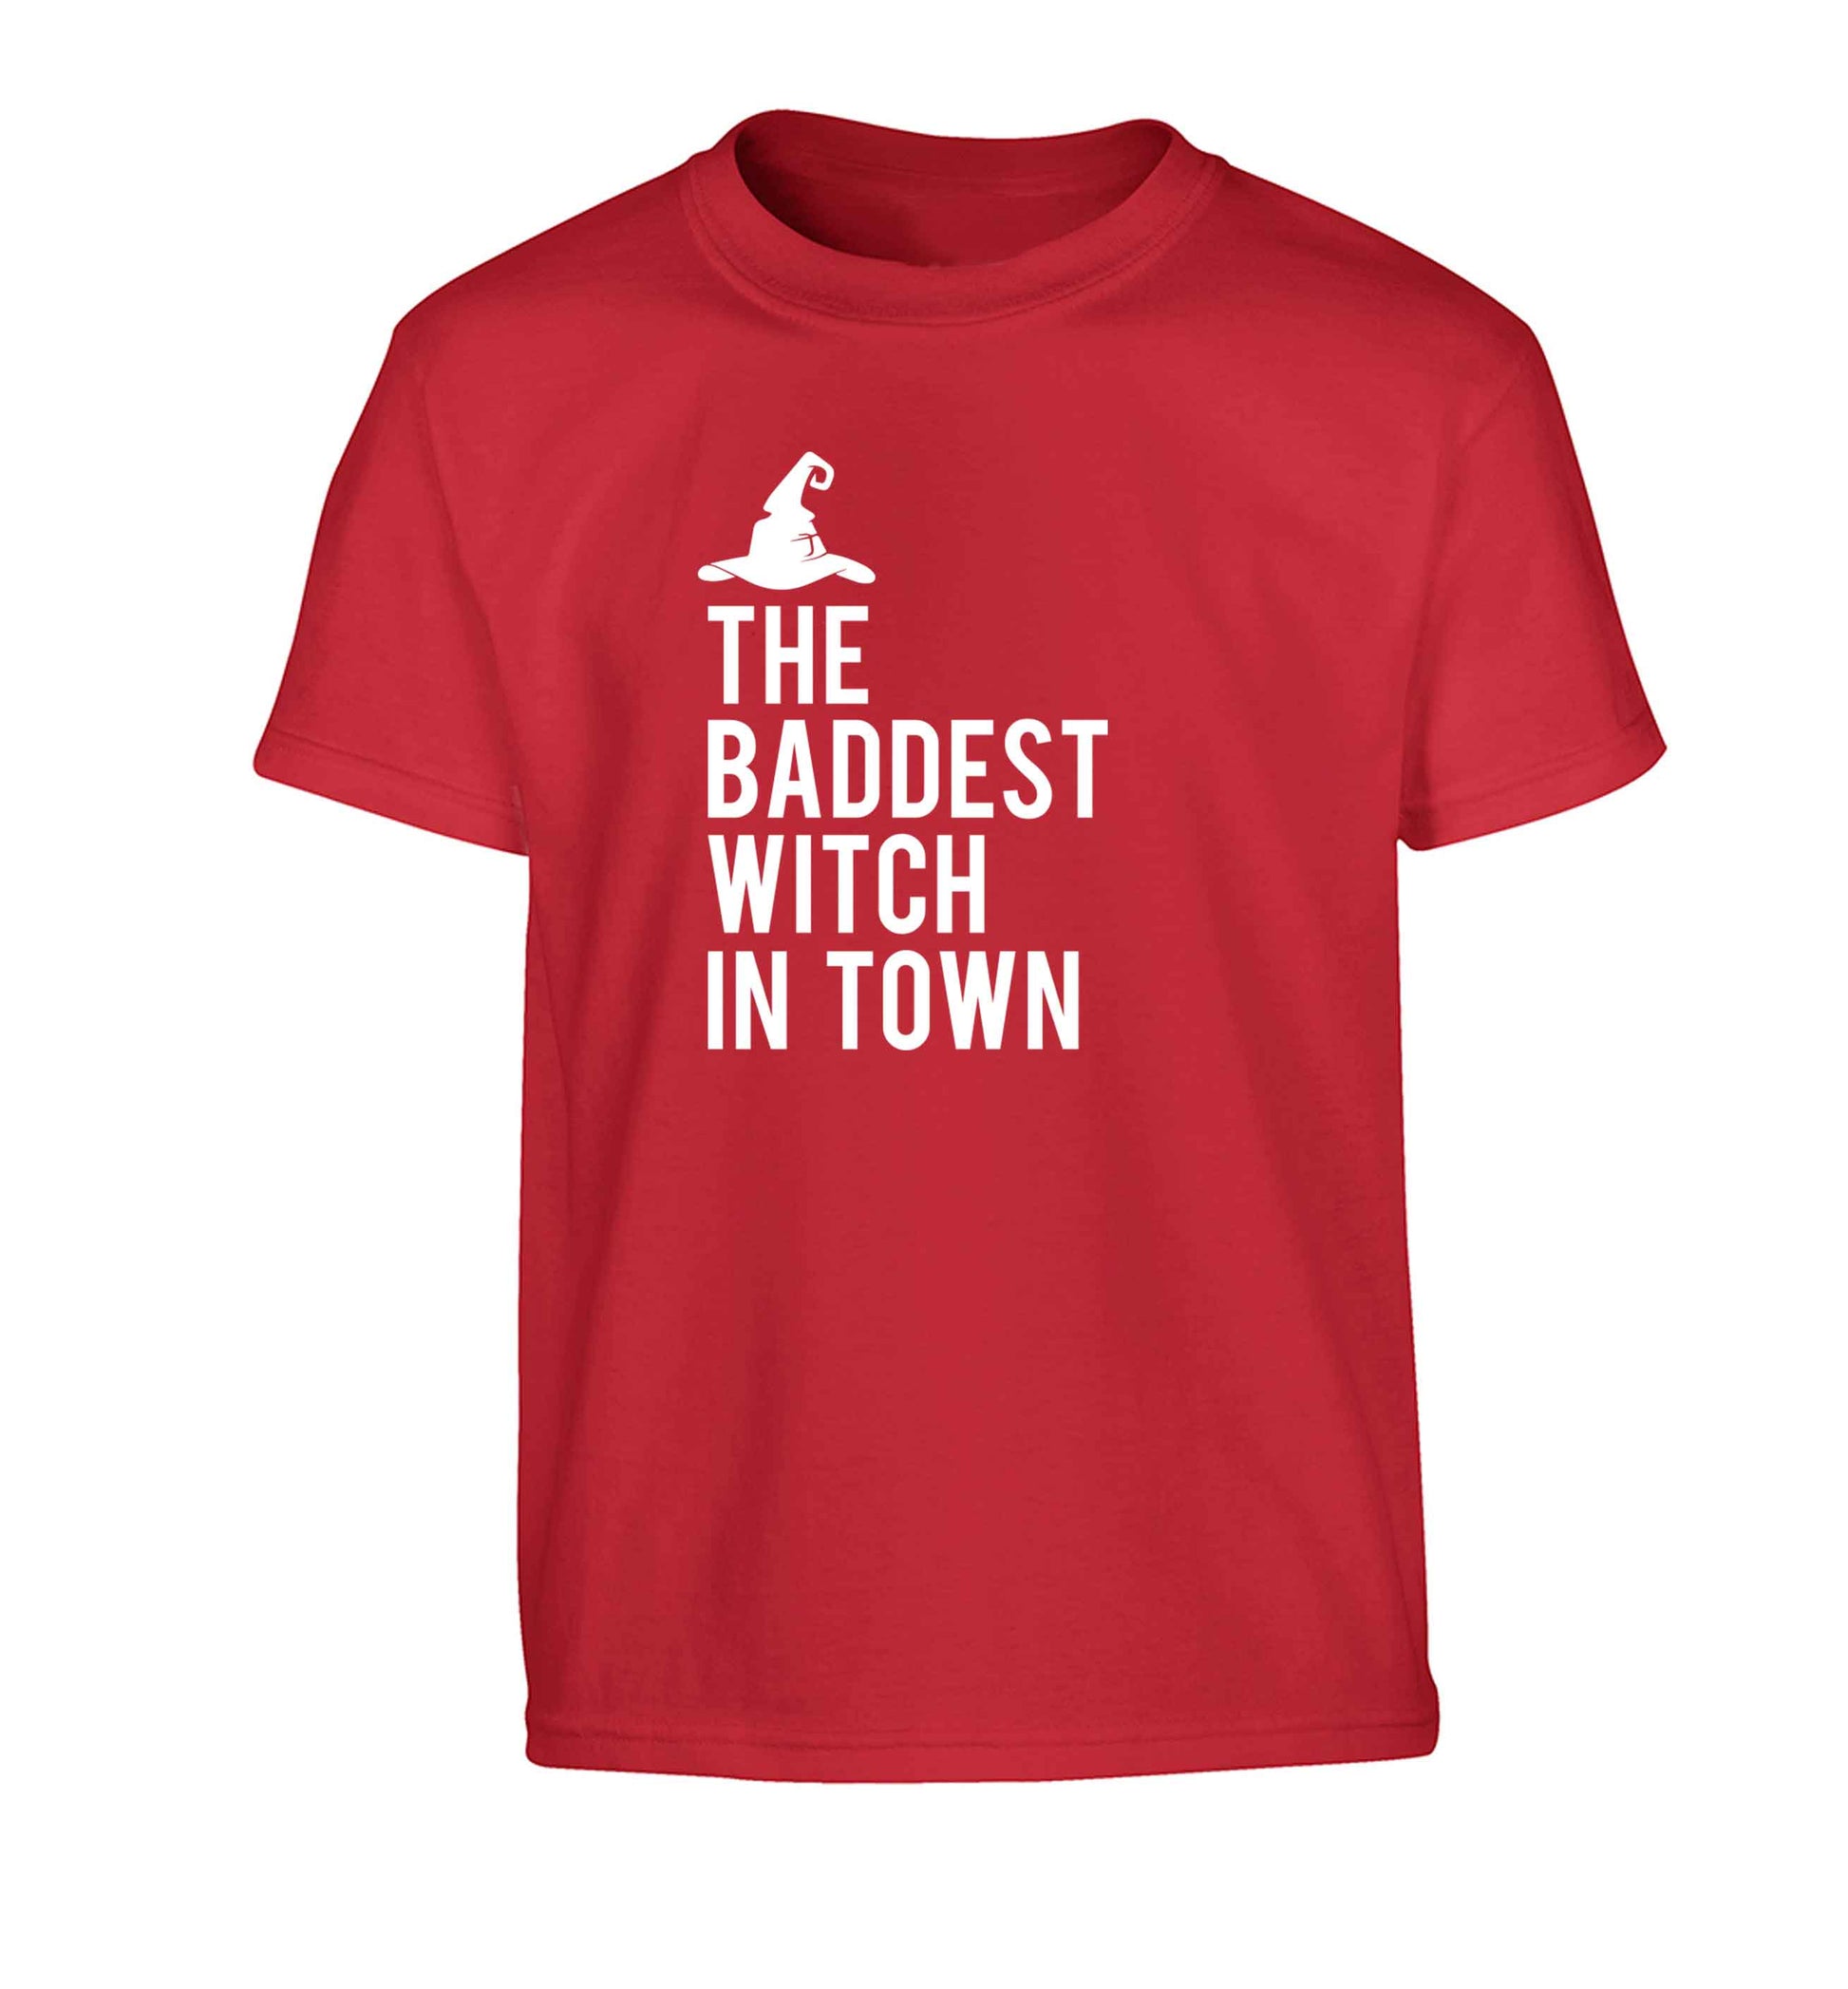 Badest witch in town Children's red Tshirt 12-13 Years